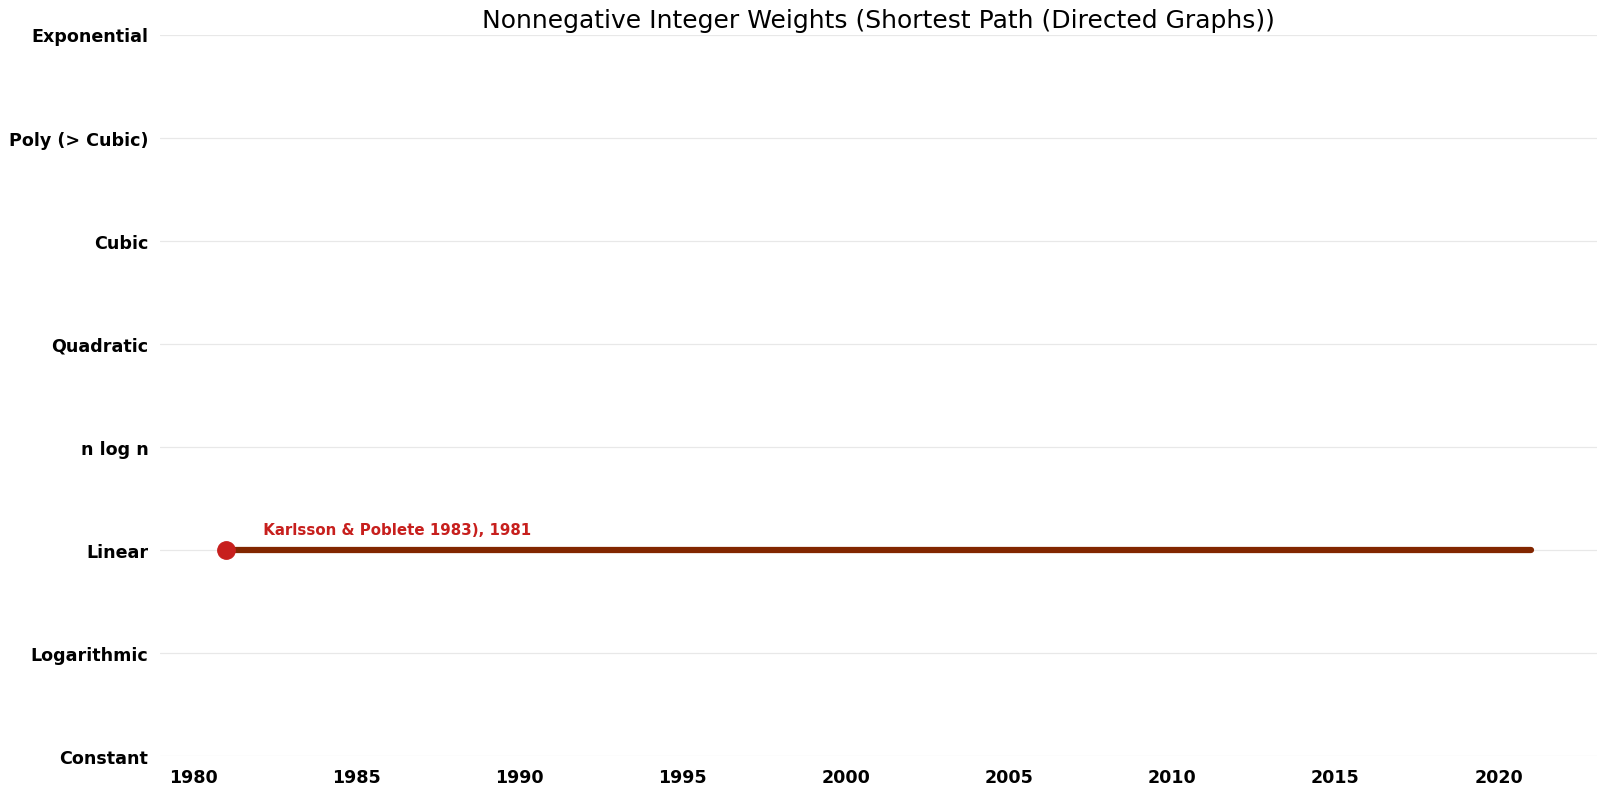 Shortest Path (Directed Graphs) - Nonnegative Integer Weights - Space.png